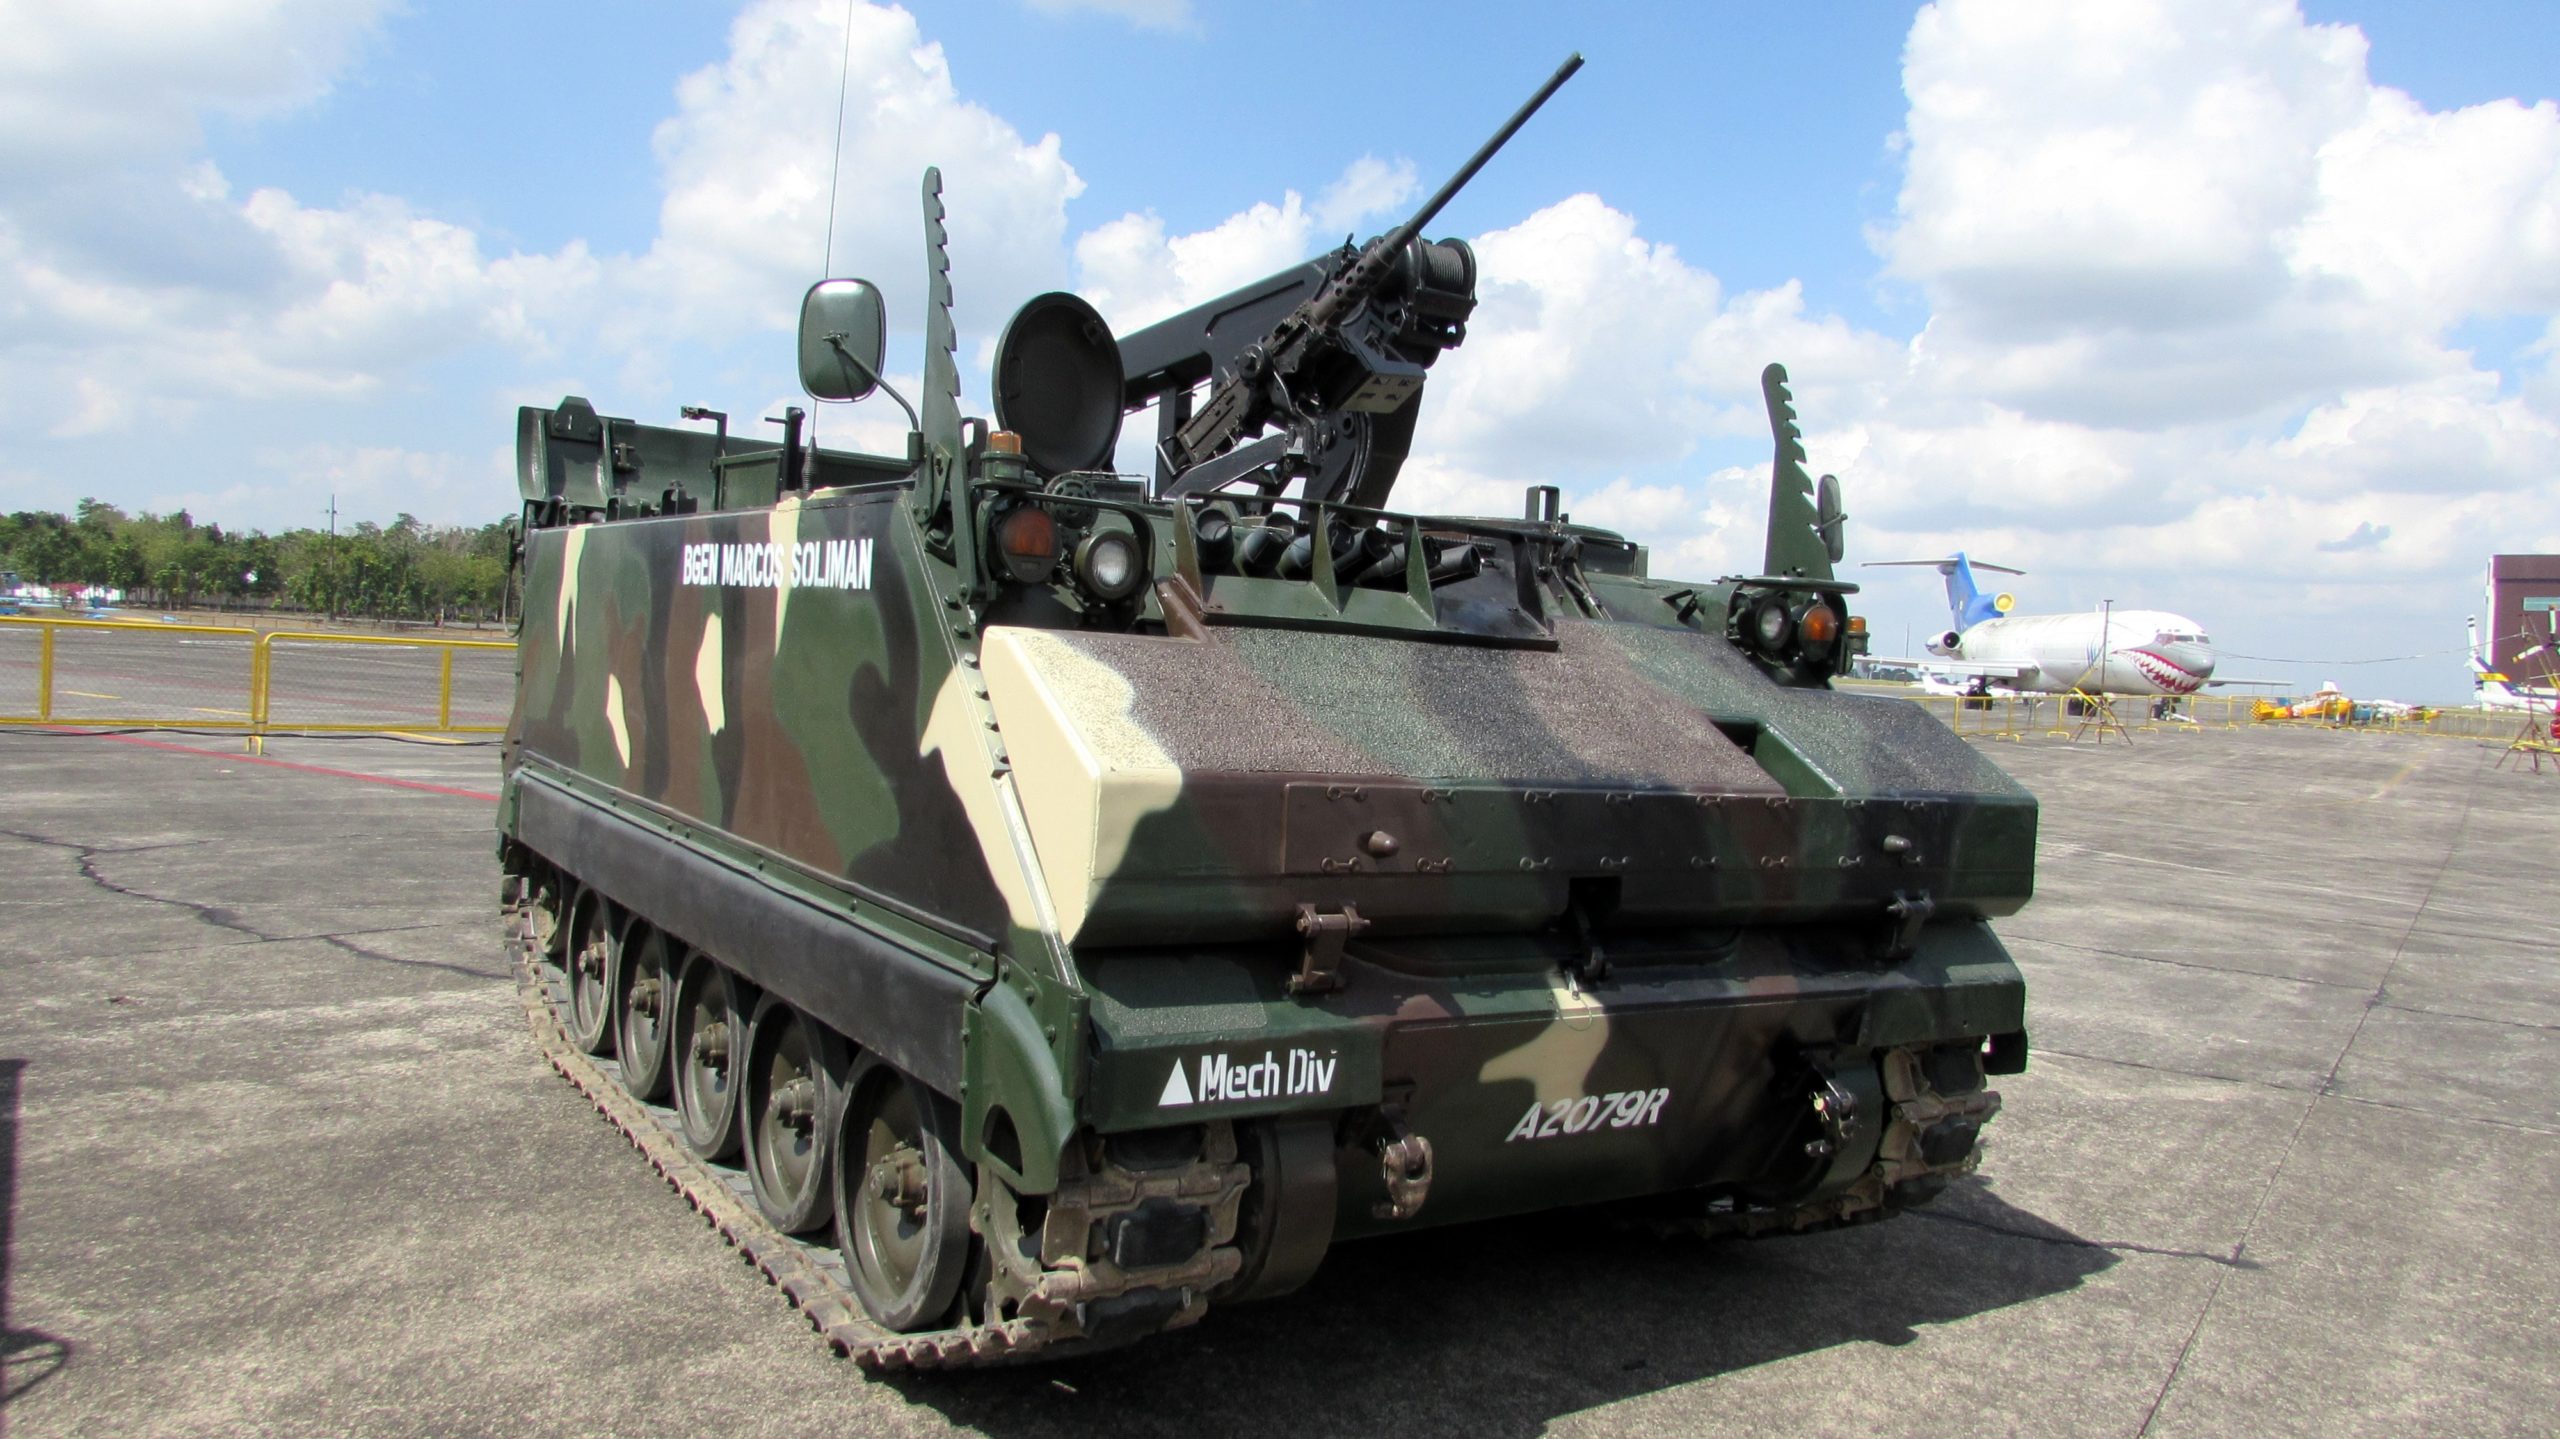 The M-113 A1/A2, locally designated in Colombia as TPM-113 (Transport of Military Personnel), are the armored vehicles with the longest service time in the Colombian Army, with a current inventory of 54 units.